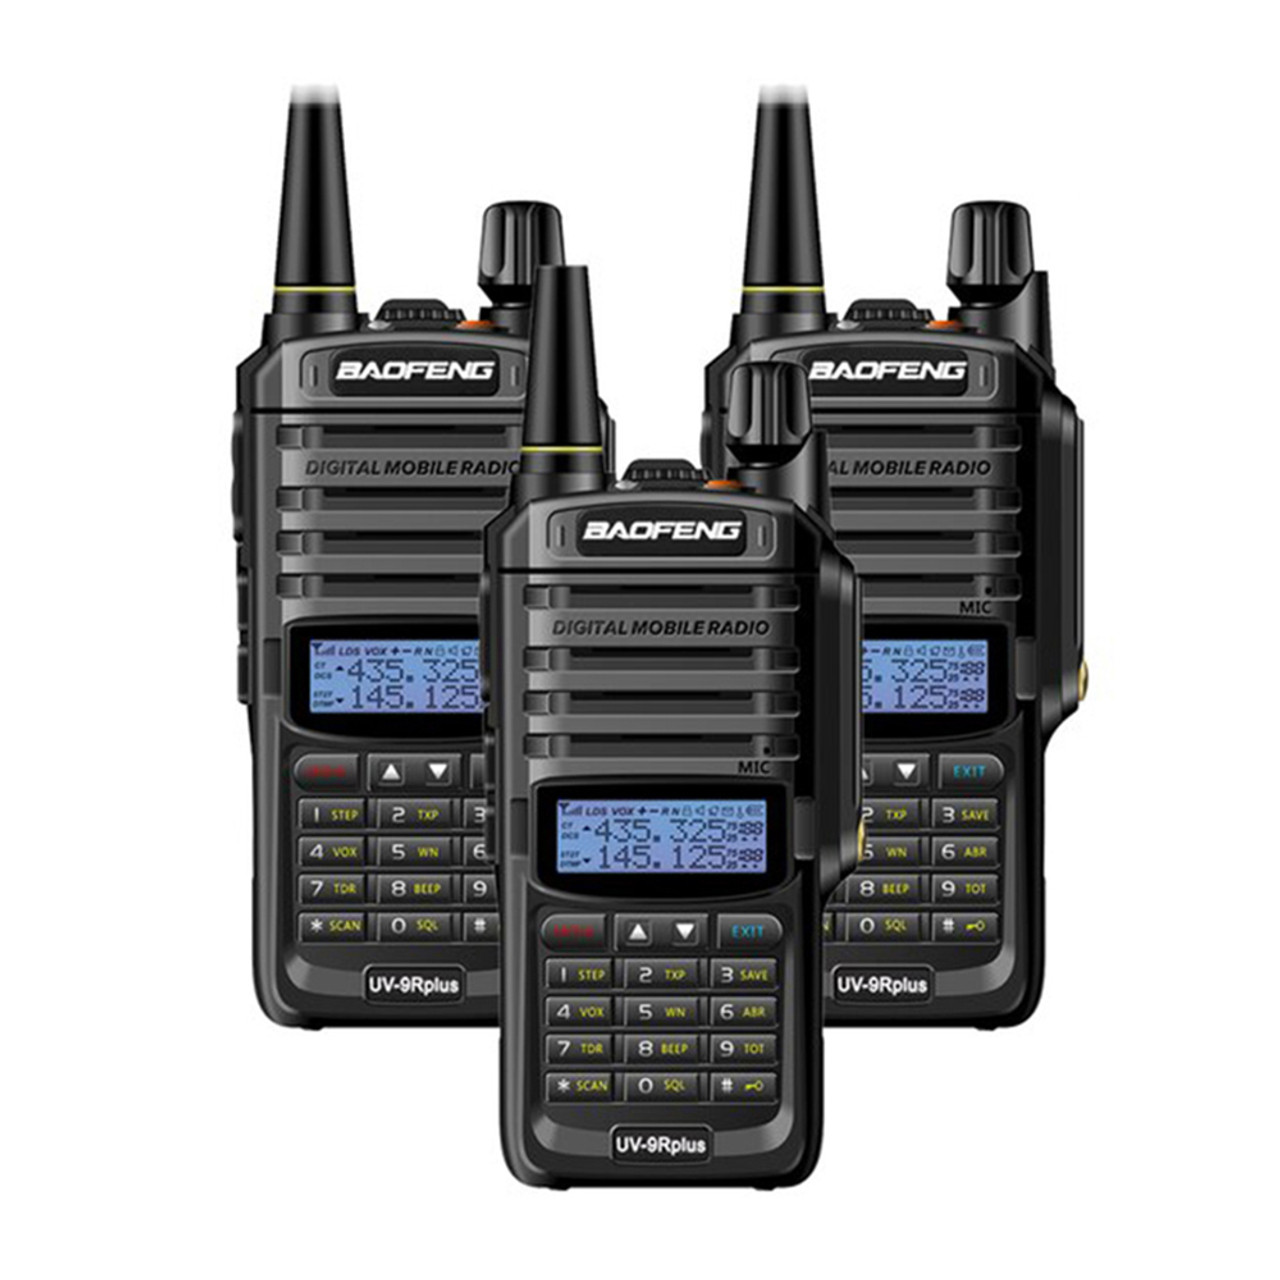 Ham Radio Walkie Talkie (UV-5R) UHF VHF Dual Band 2-Way Radio with Rechargeable Li-ion Battery Handheld Walkie Talkies Complete Set with Earpiece and - 3